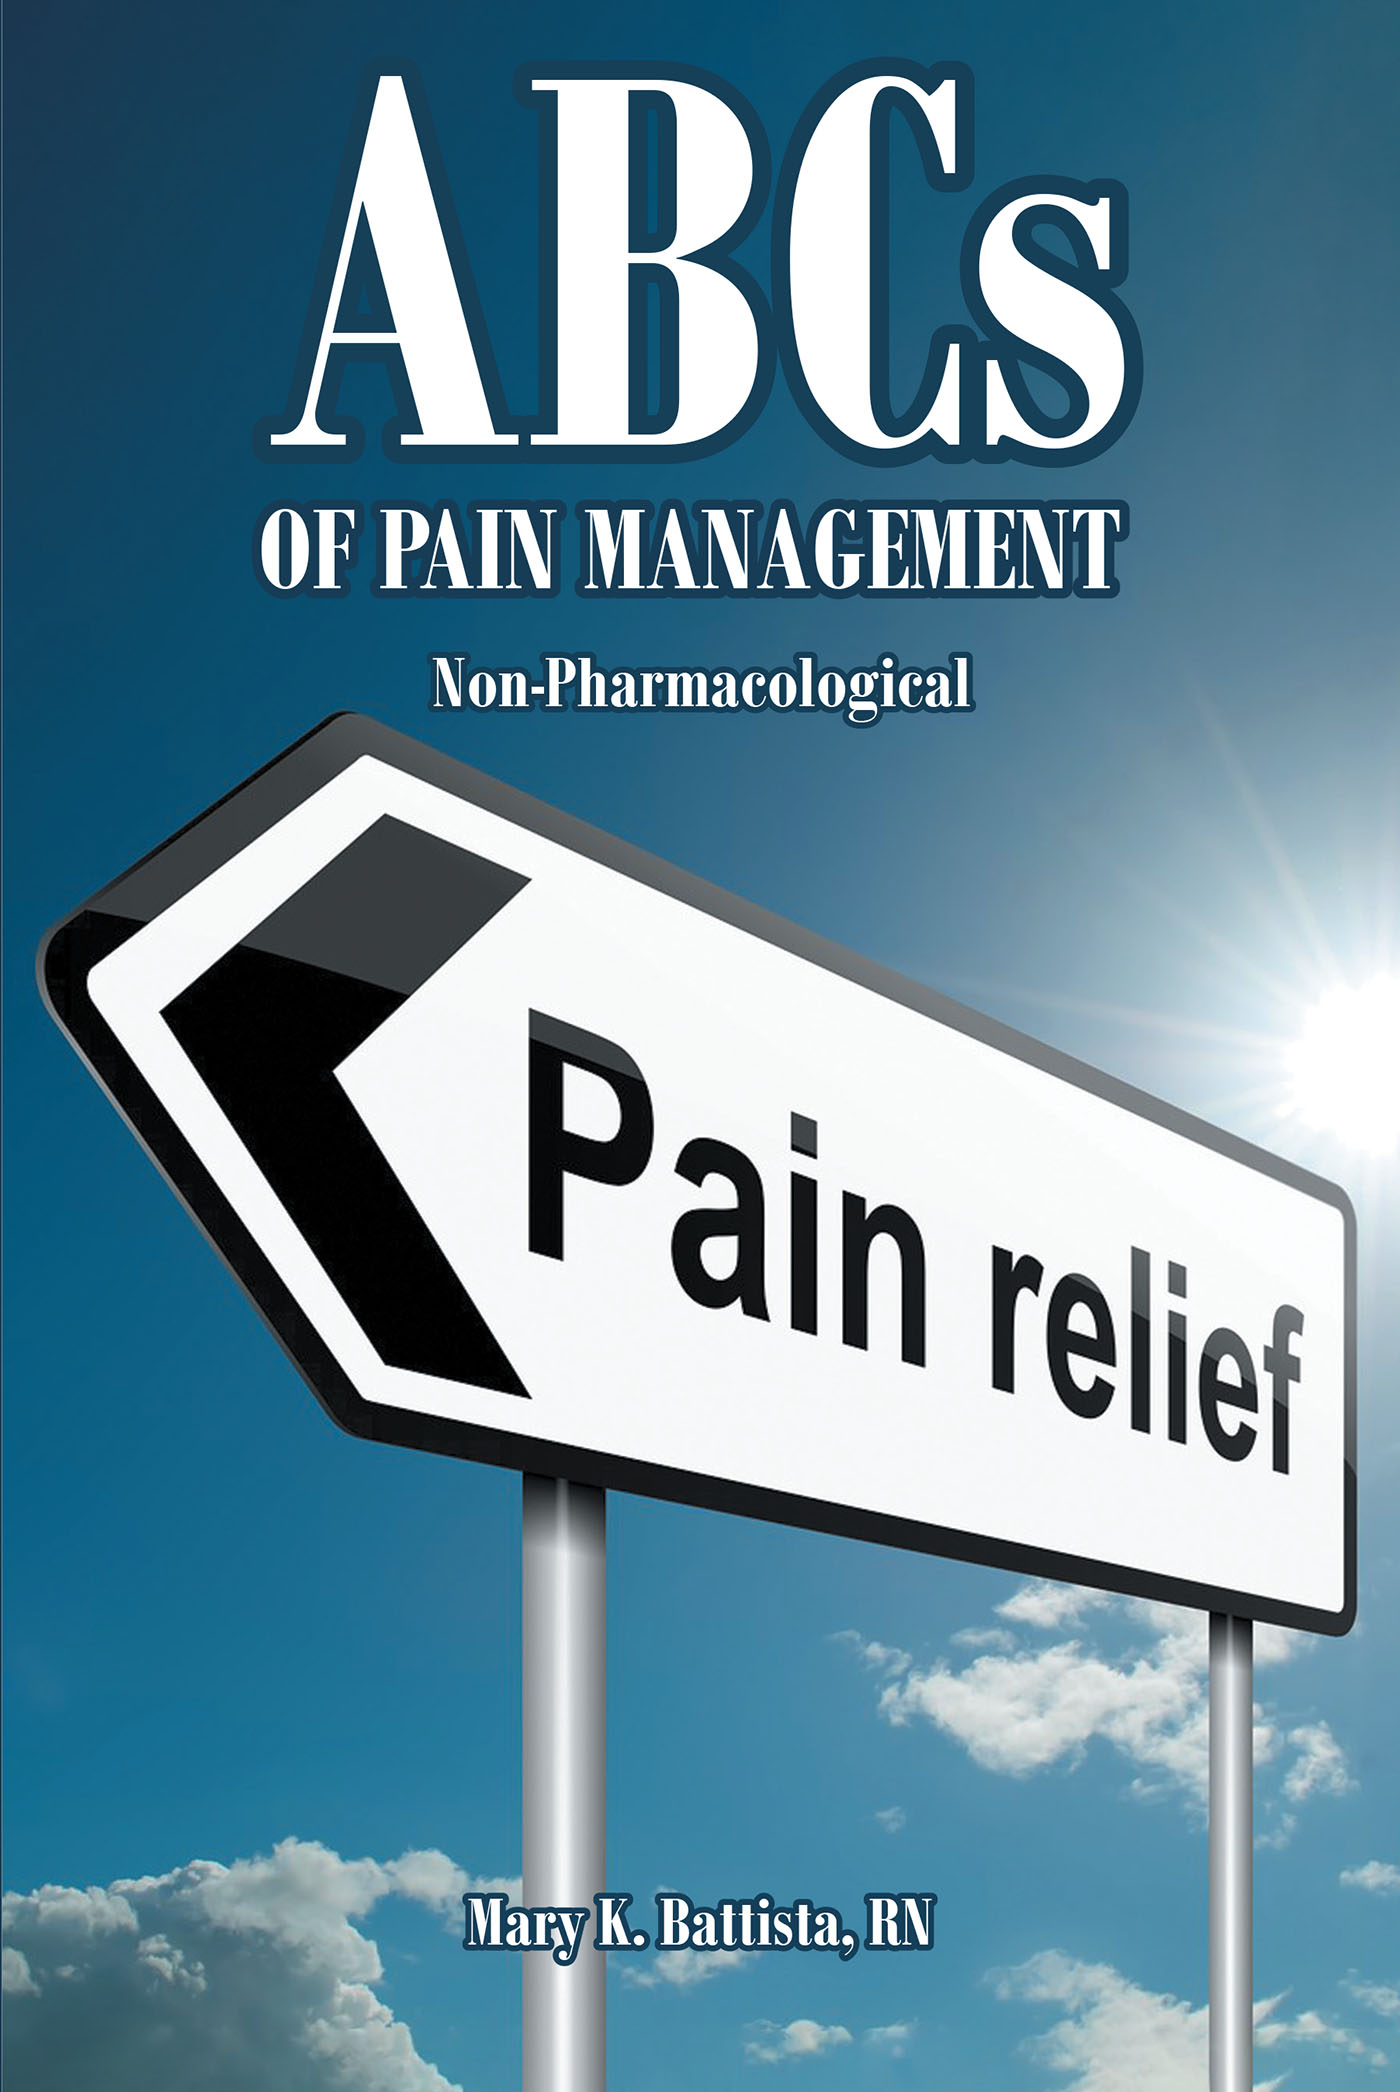 Author Mary K. Battista, RN’s New Book, “ABCs of Pain Management Non-Pharmacological,” is a Tool That Offers Alternative Solutions for Mild to Moderate Pain